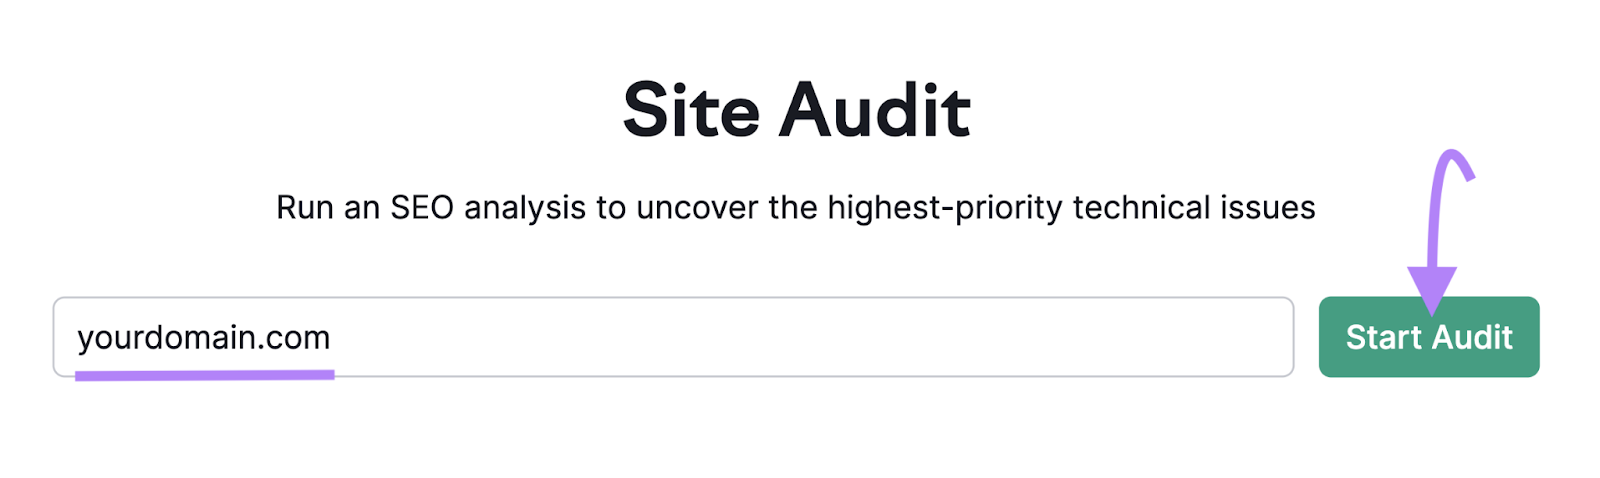 Site Audit instrumentality   hunt  for "yourdomain.com"